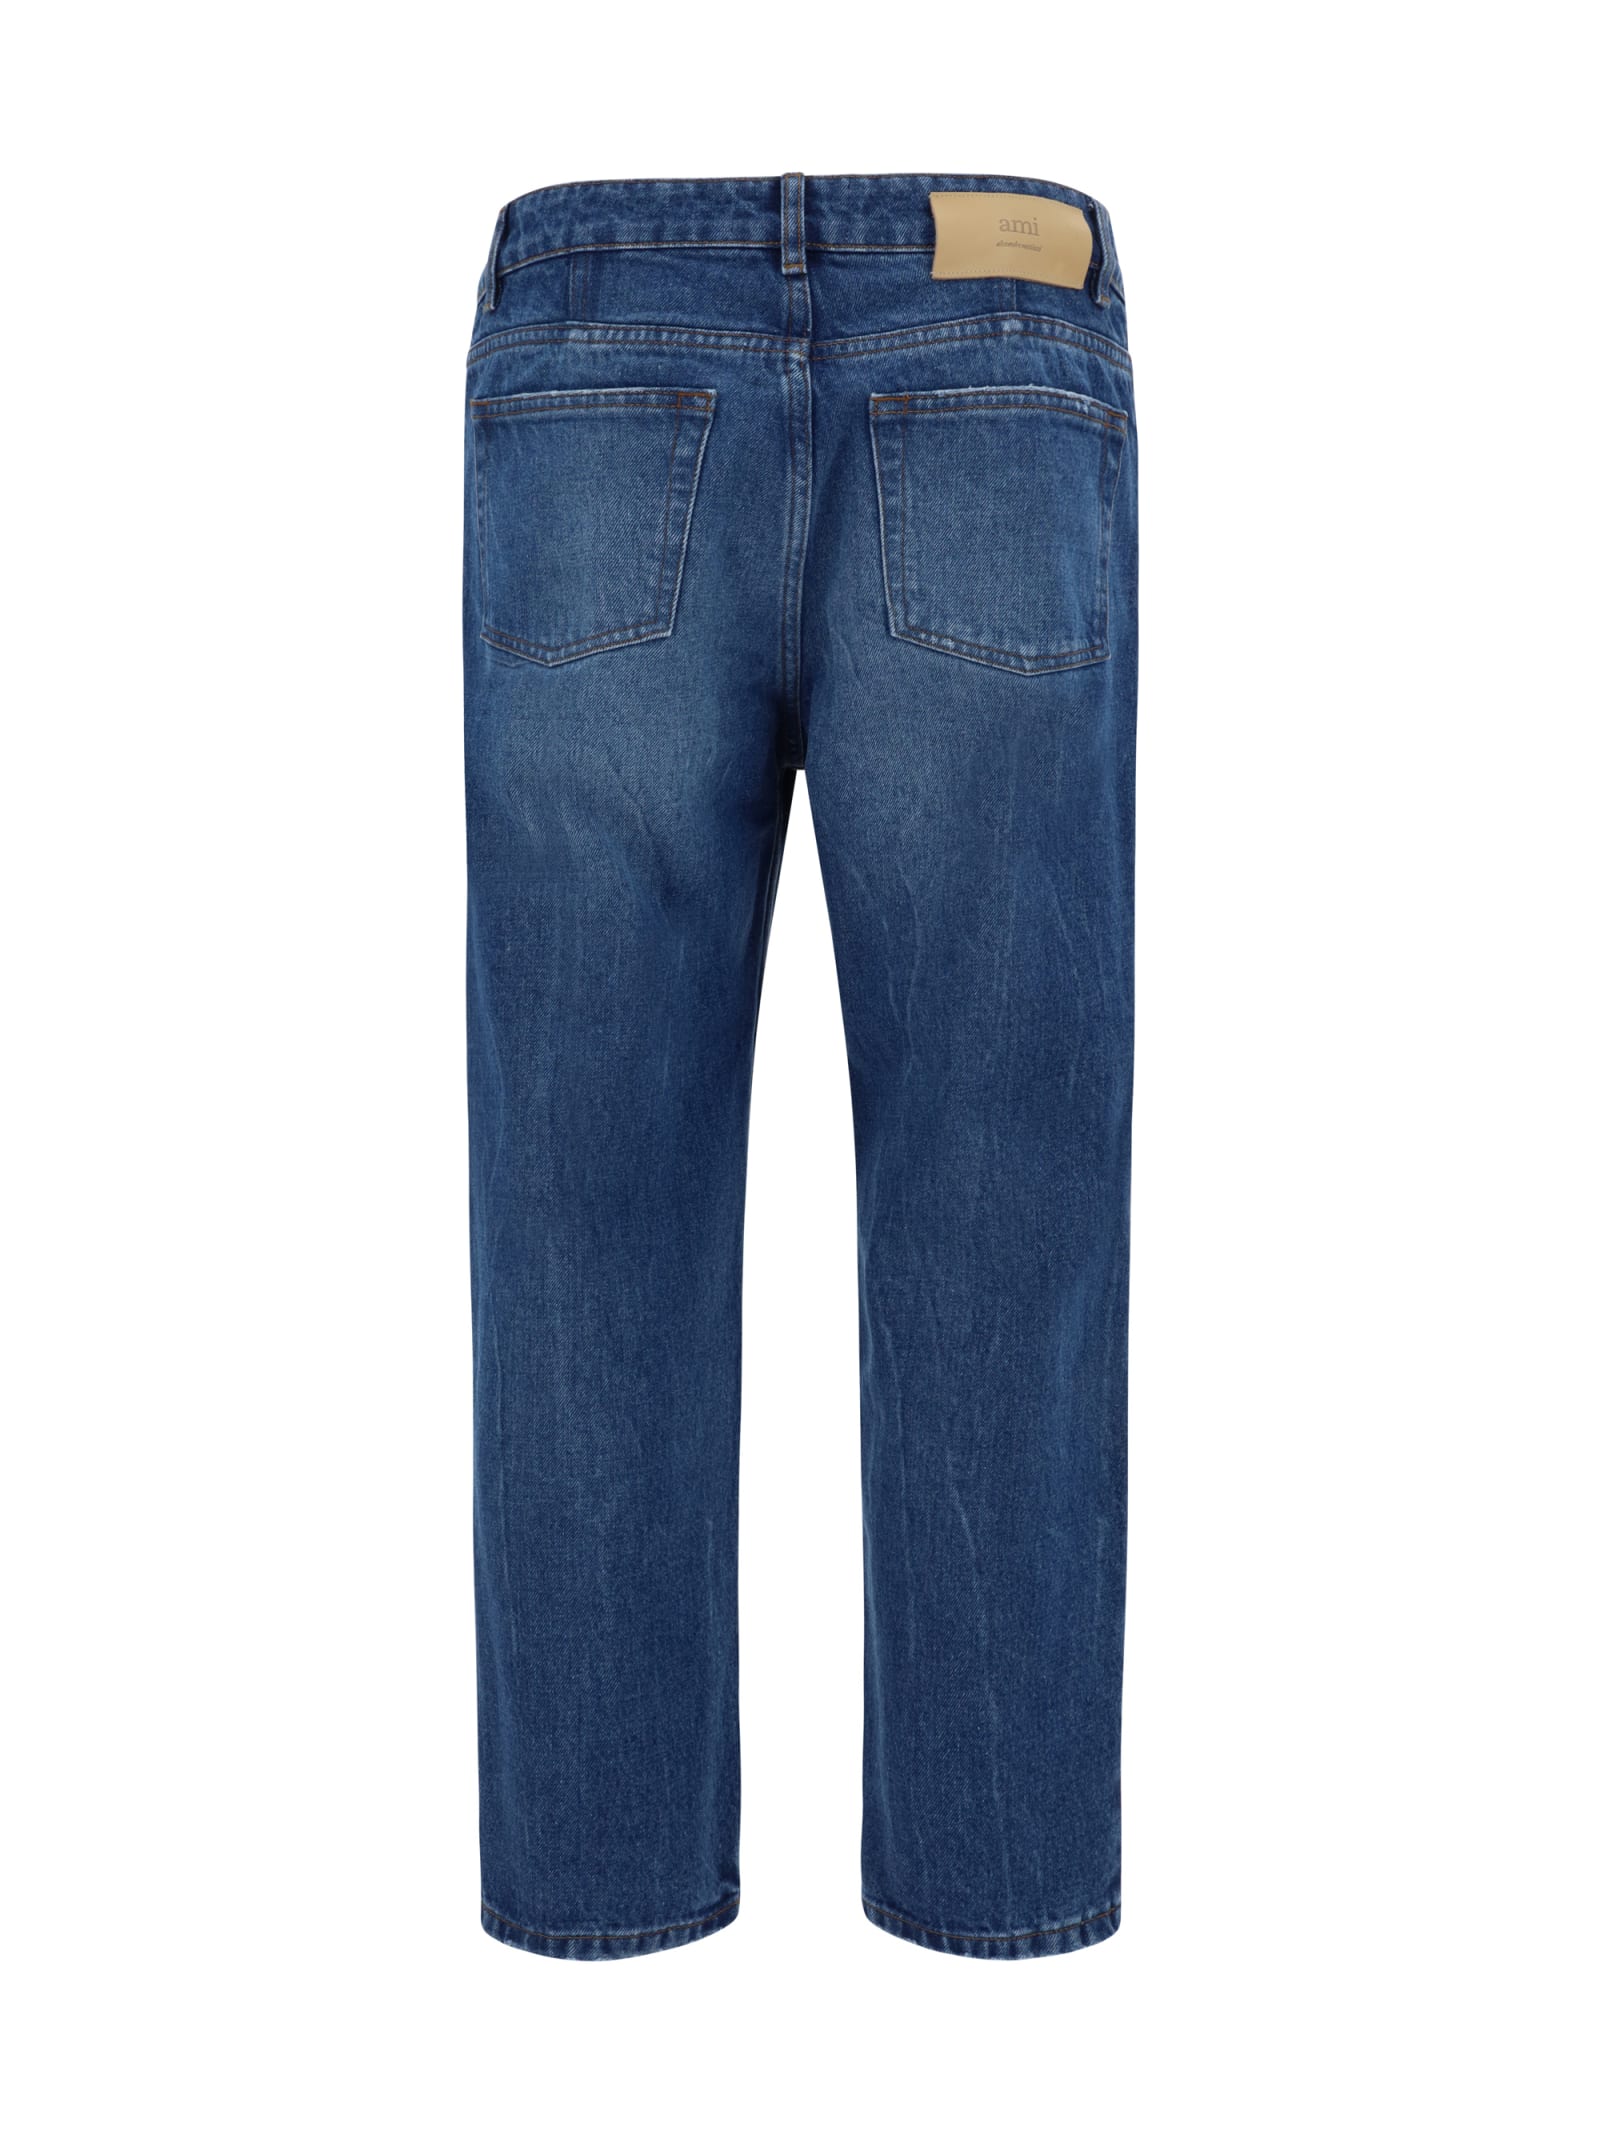 Shop Ami Alexandre Mattiussi Tapered Jeans Jeans In Used Blue